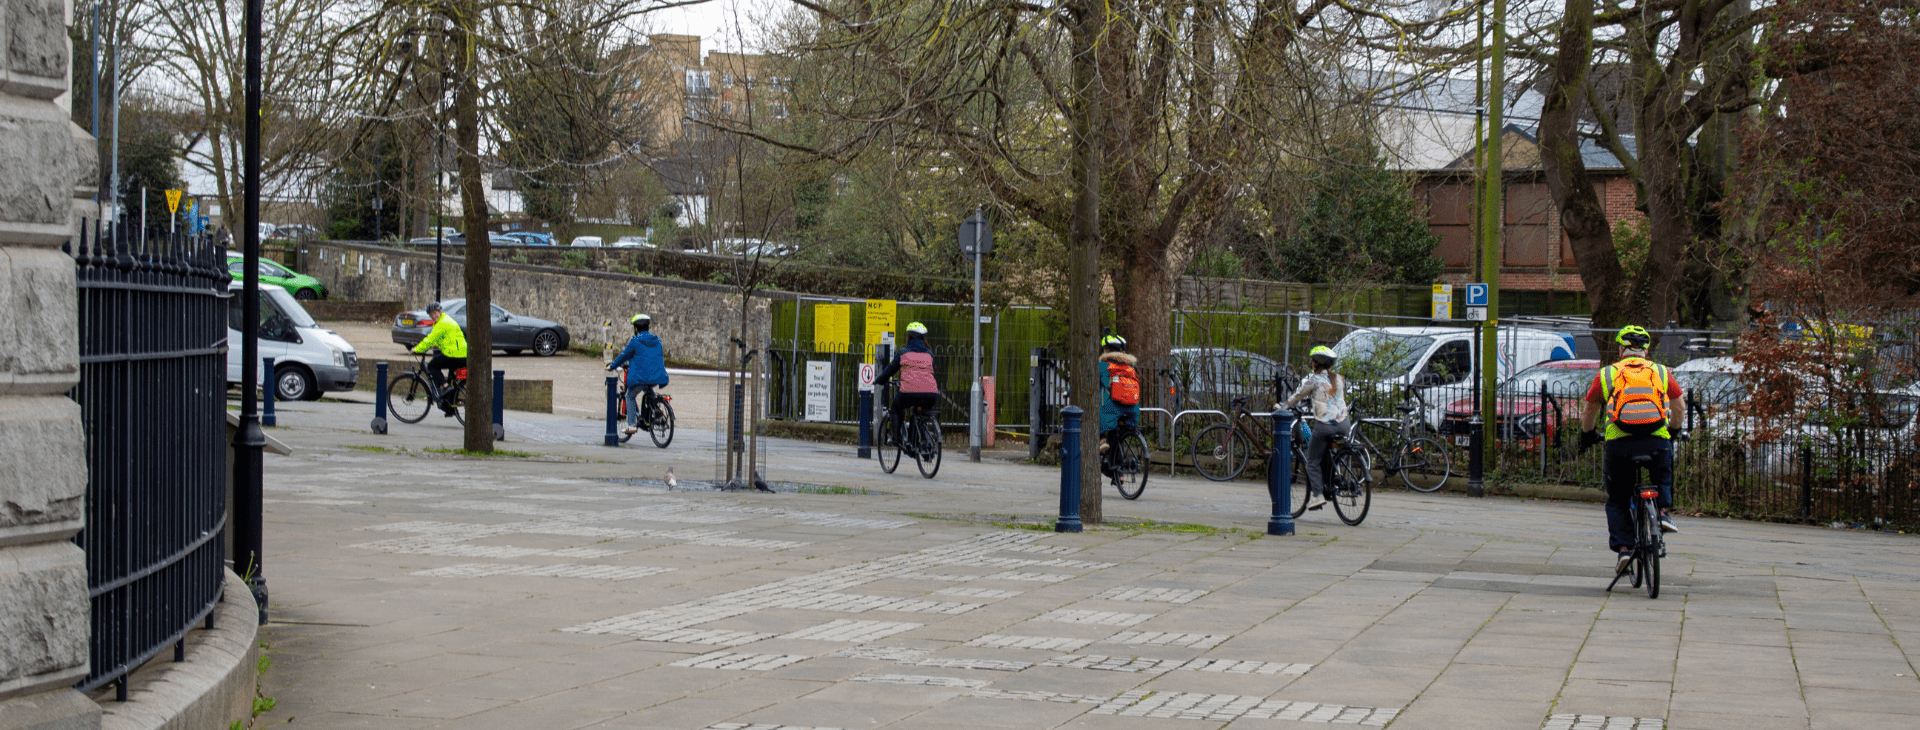 image of people cycling